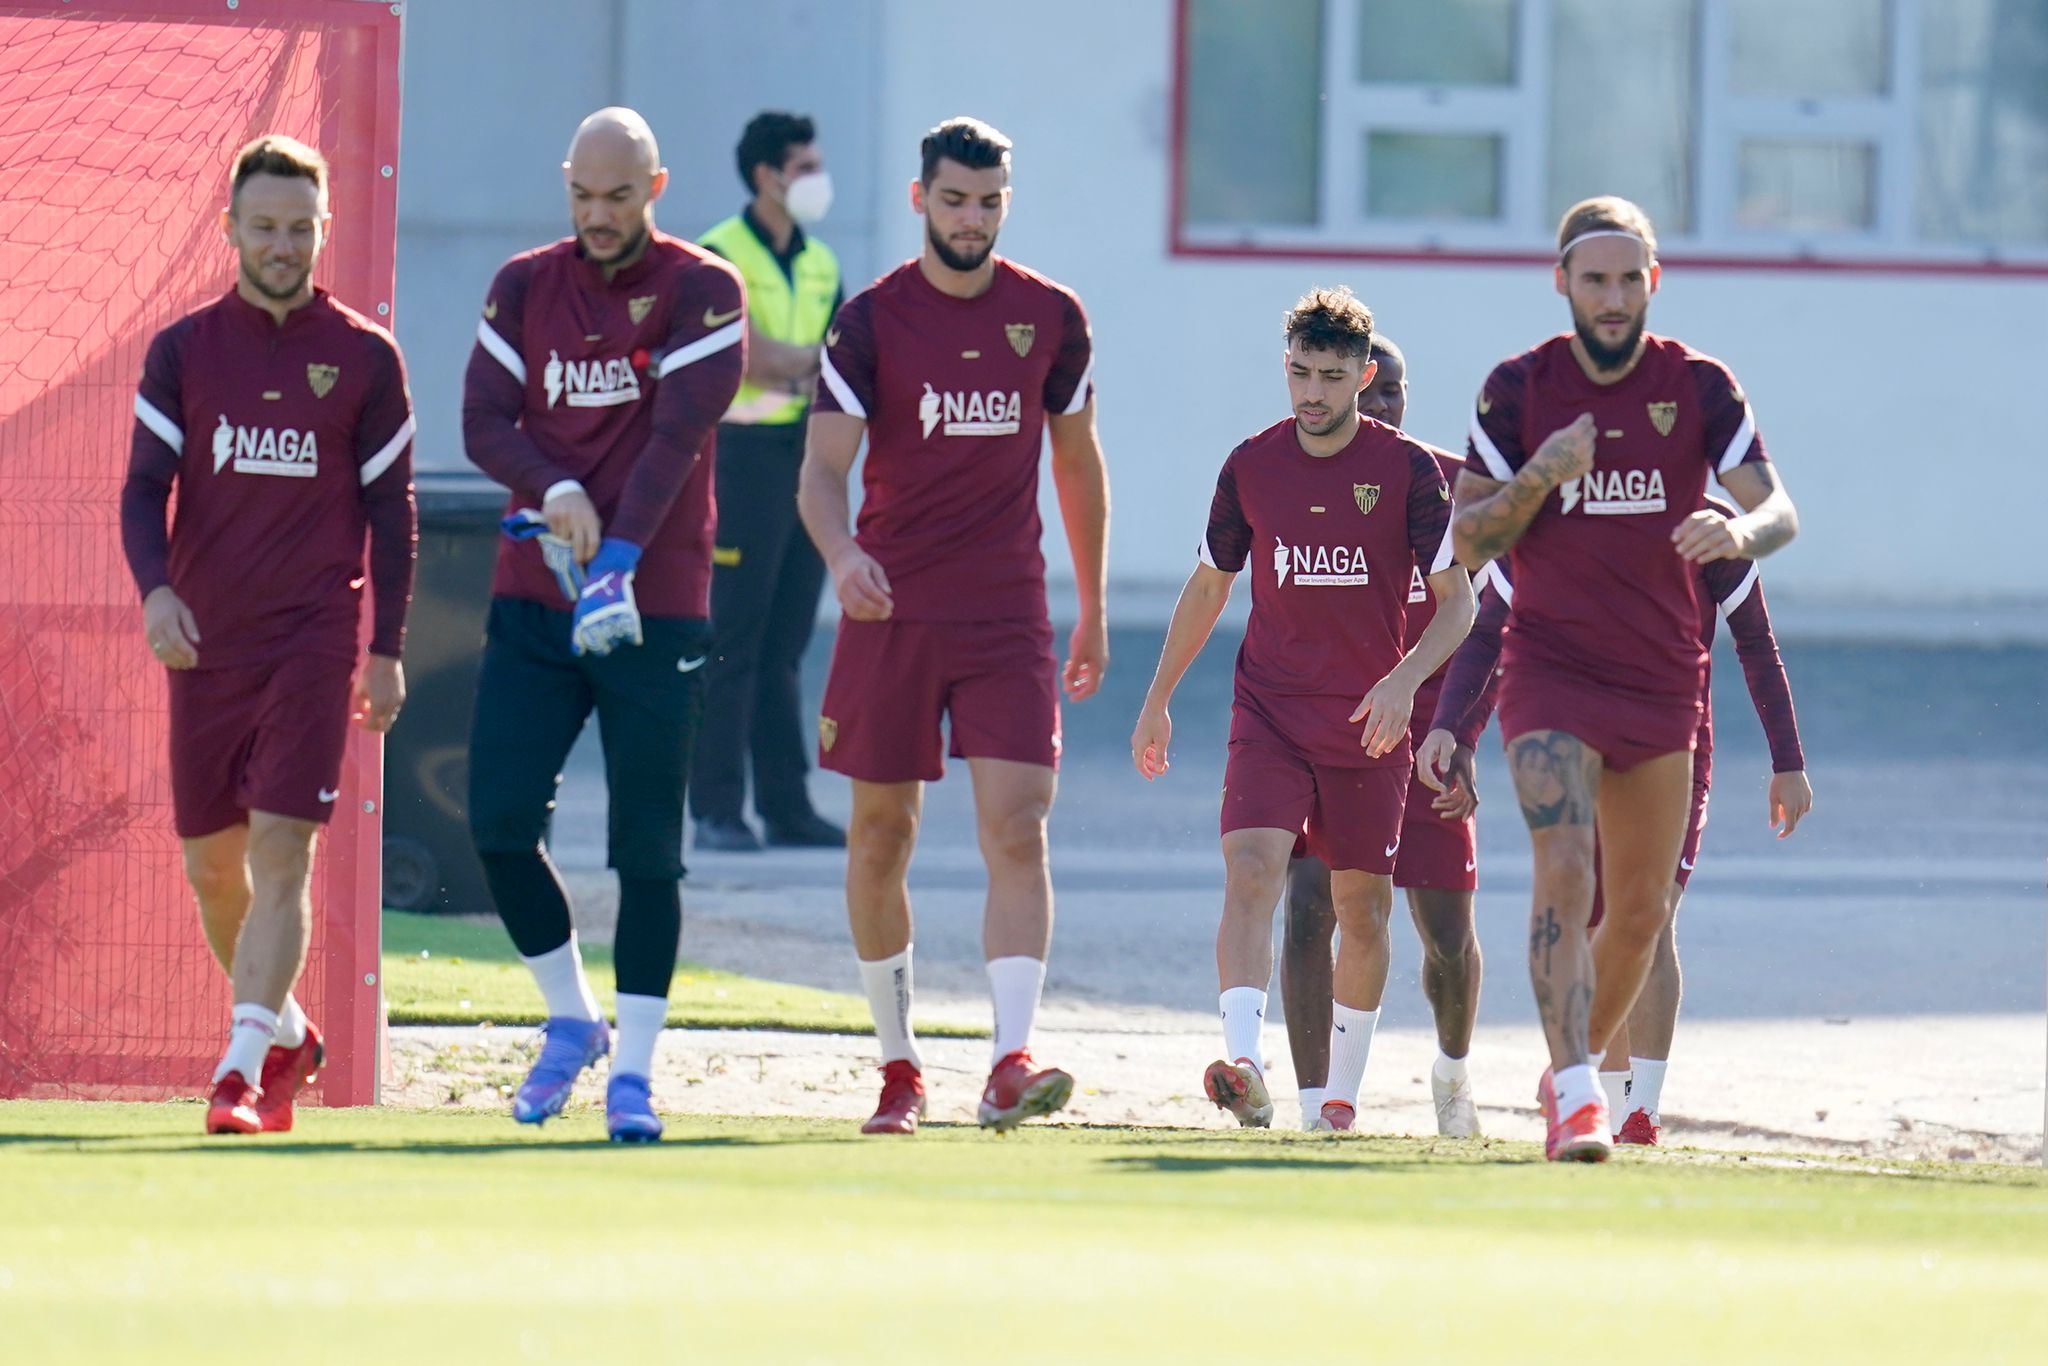 Sevilla FC trained this Thursday with the international players after their return